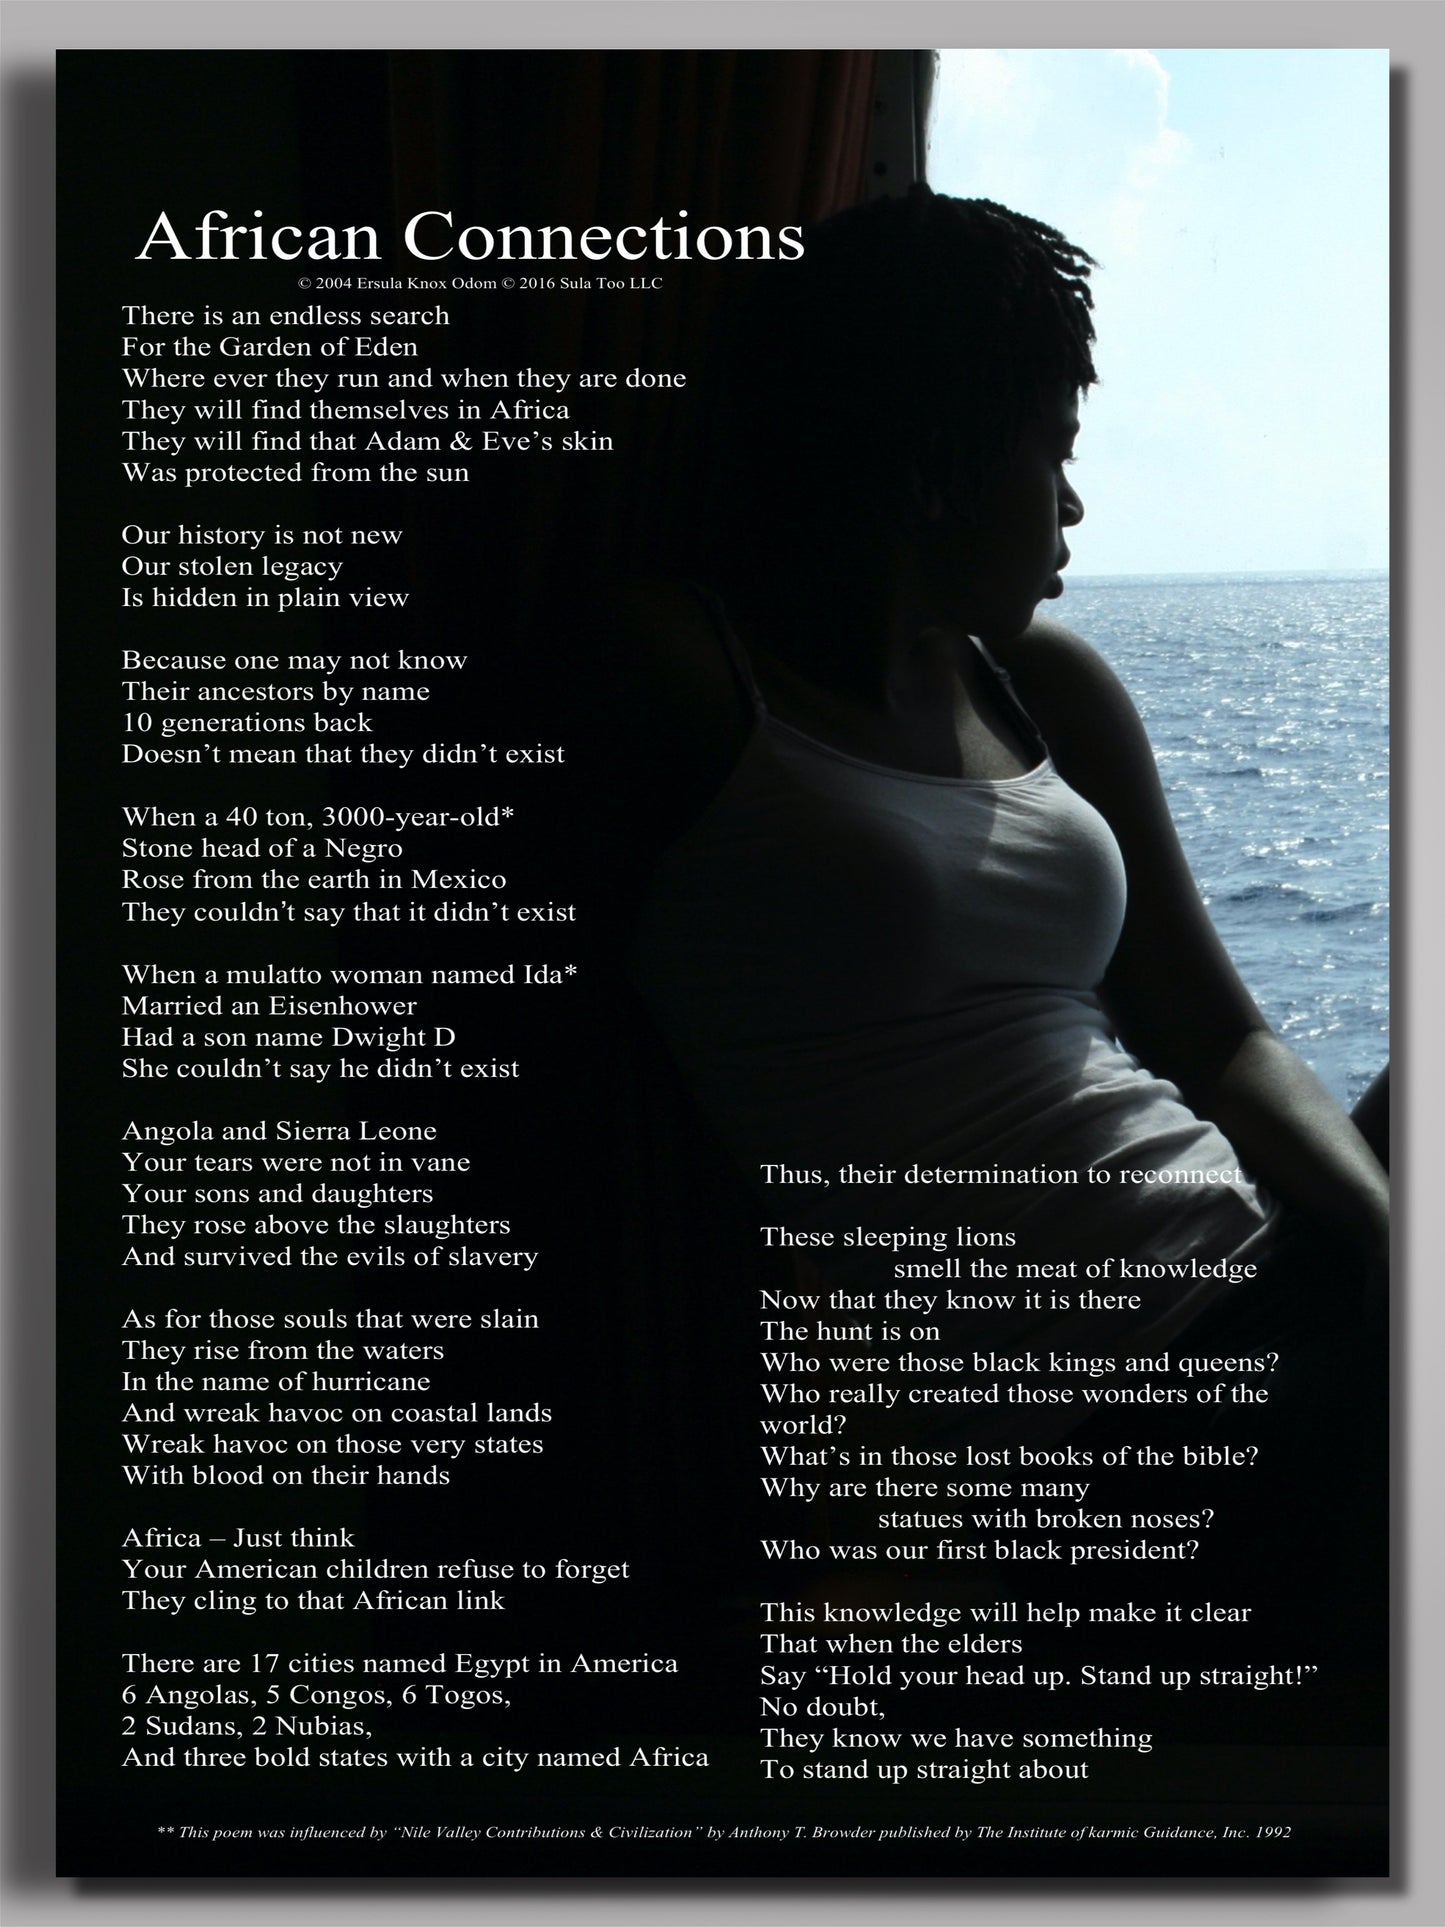 African Connections POSTER